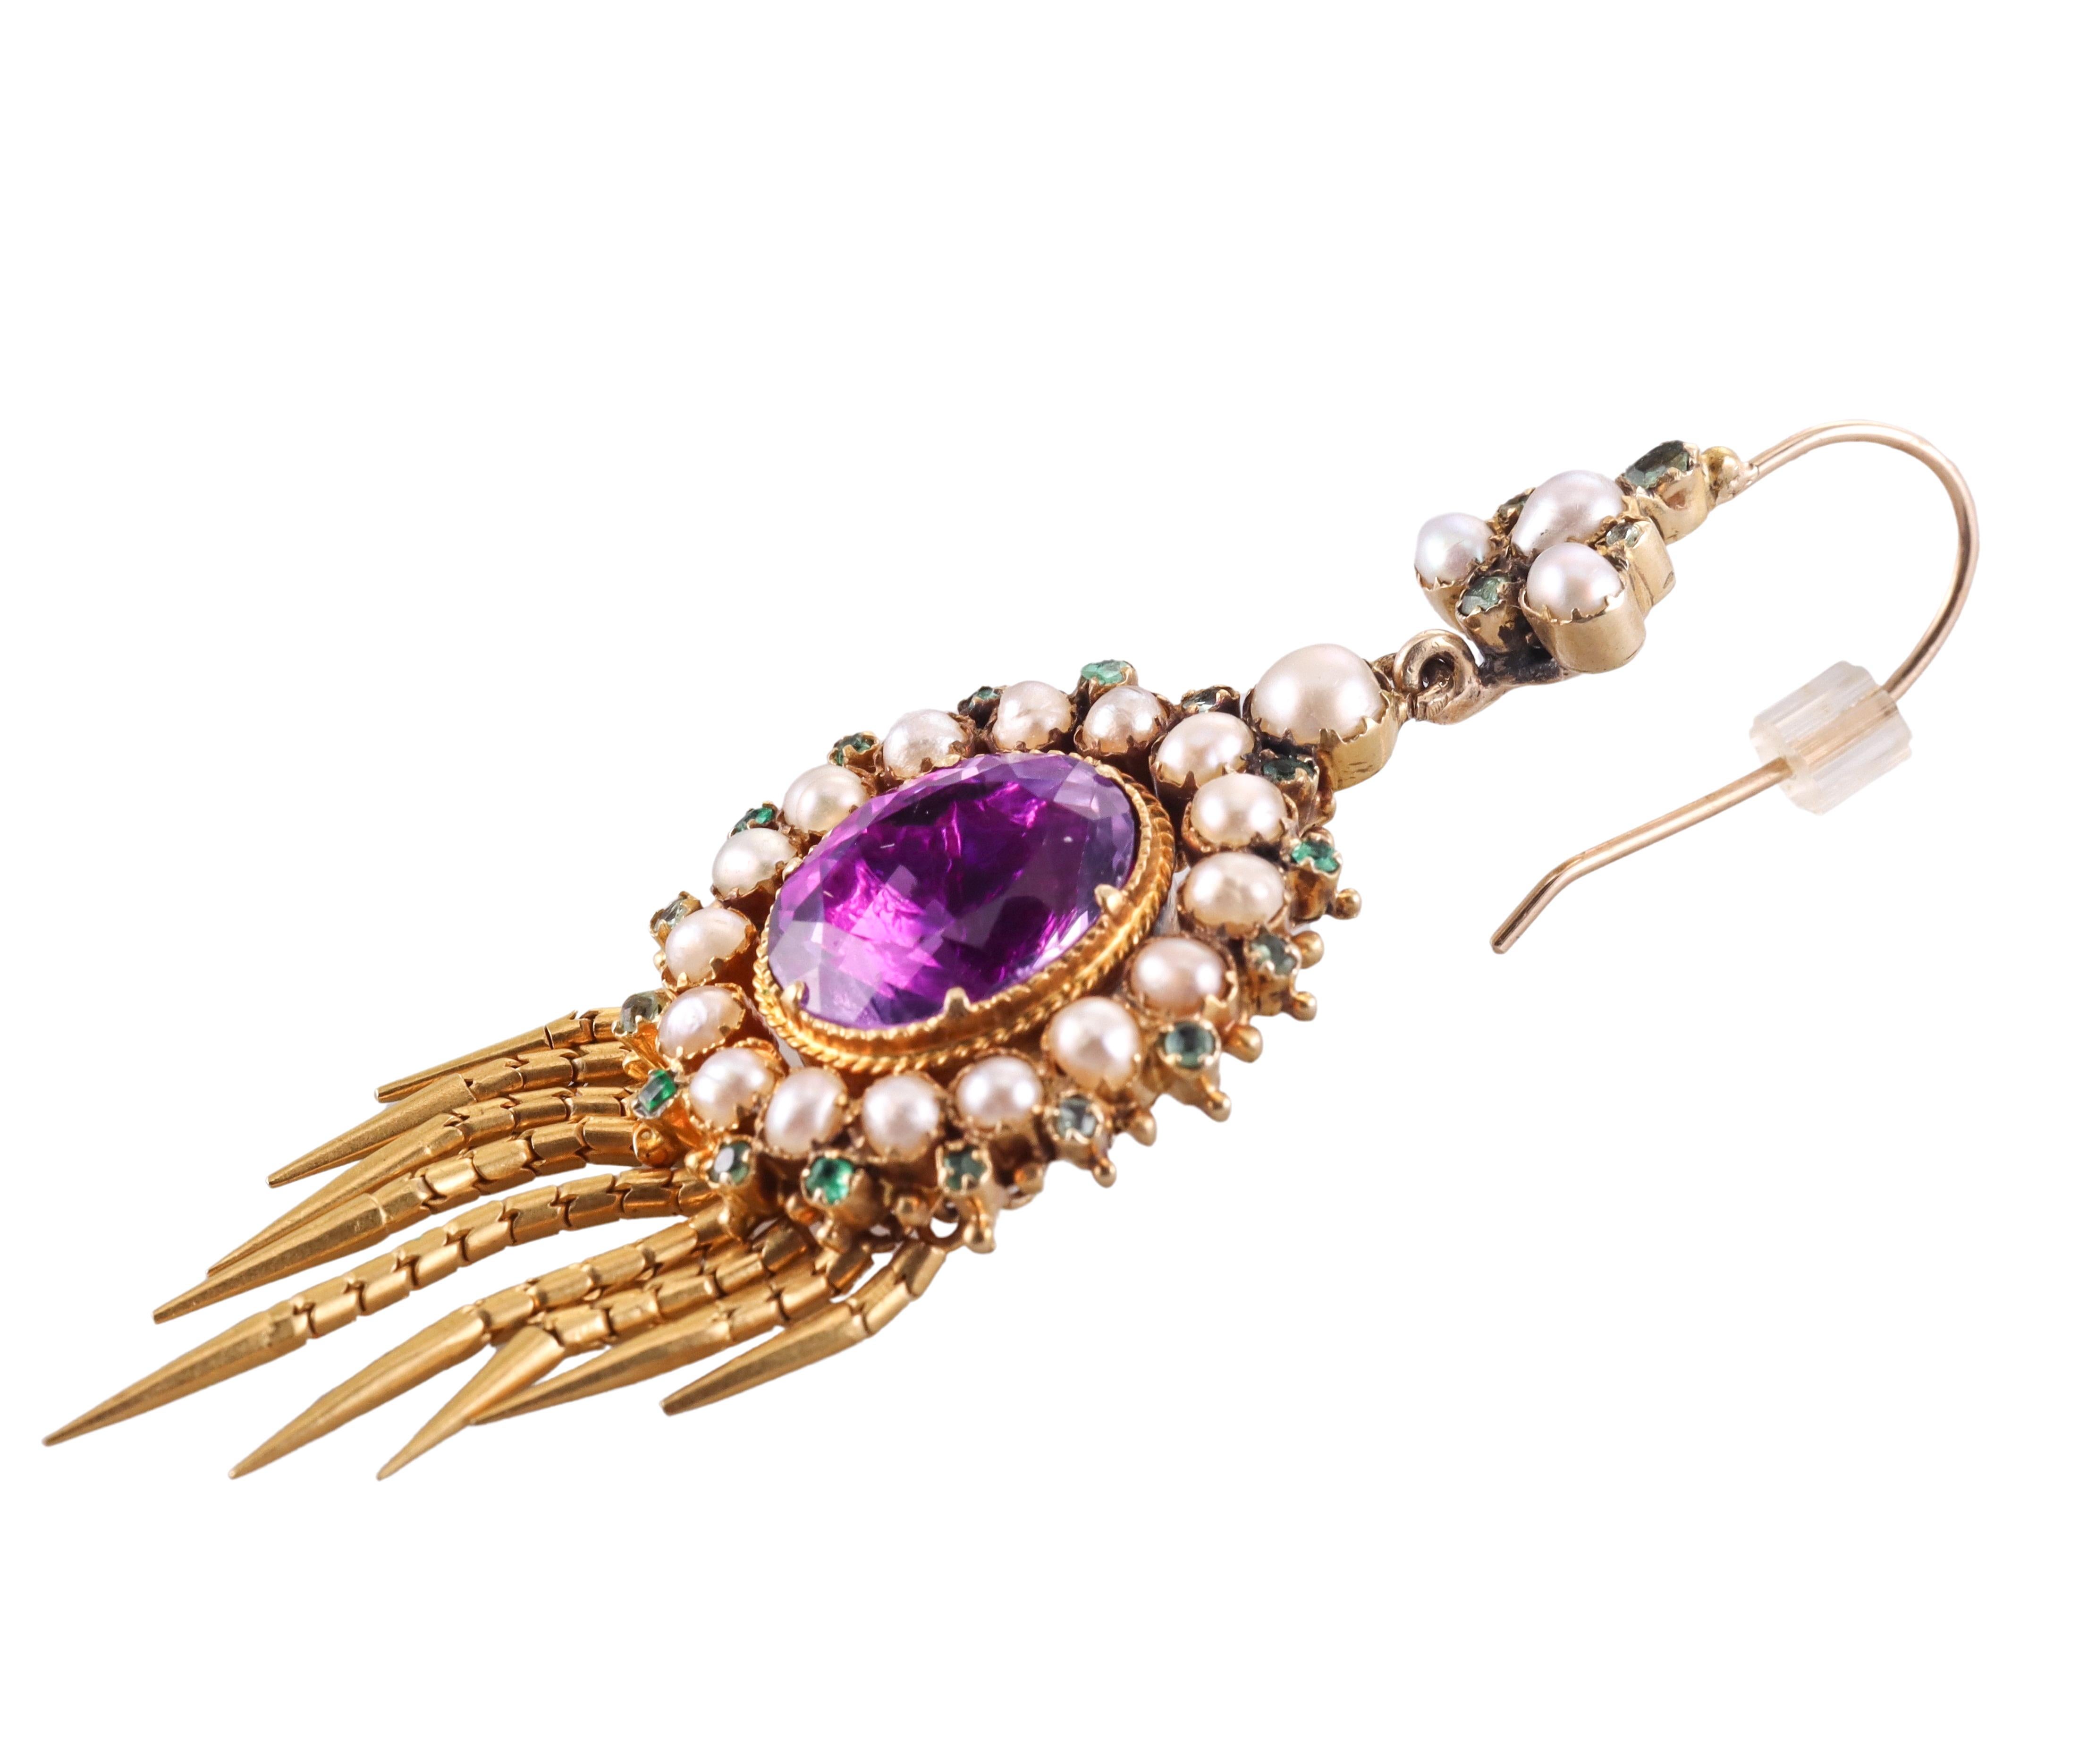 Pair of antique Etruscan Revival earrings, set in 18k gold, featuring movable fringe drops. The earrings are decorated with center oval amethysts, surrounded with pearls and small emeralds.  Measure 2.5